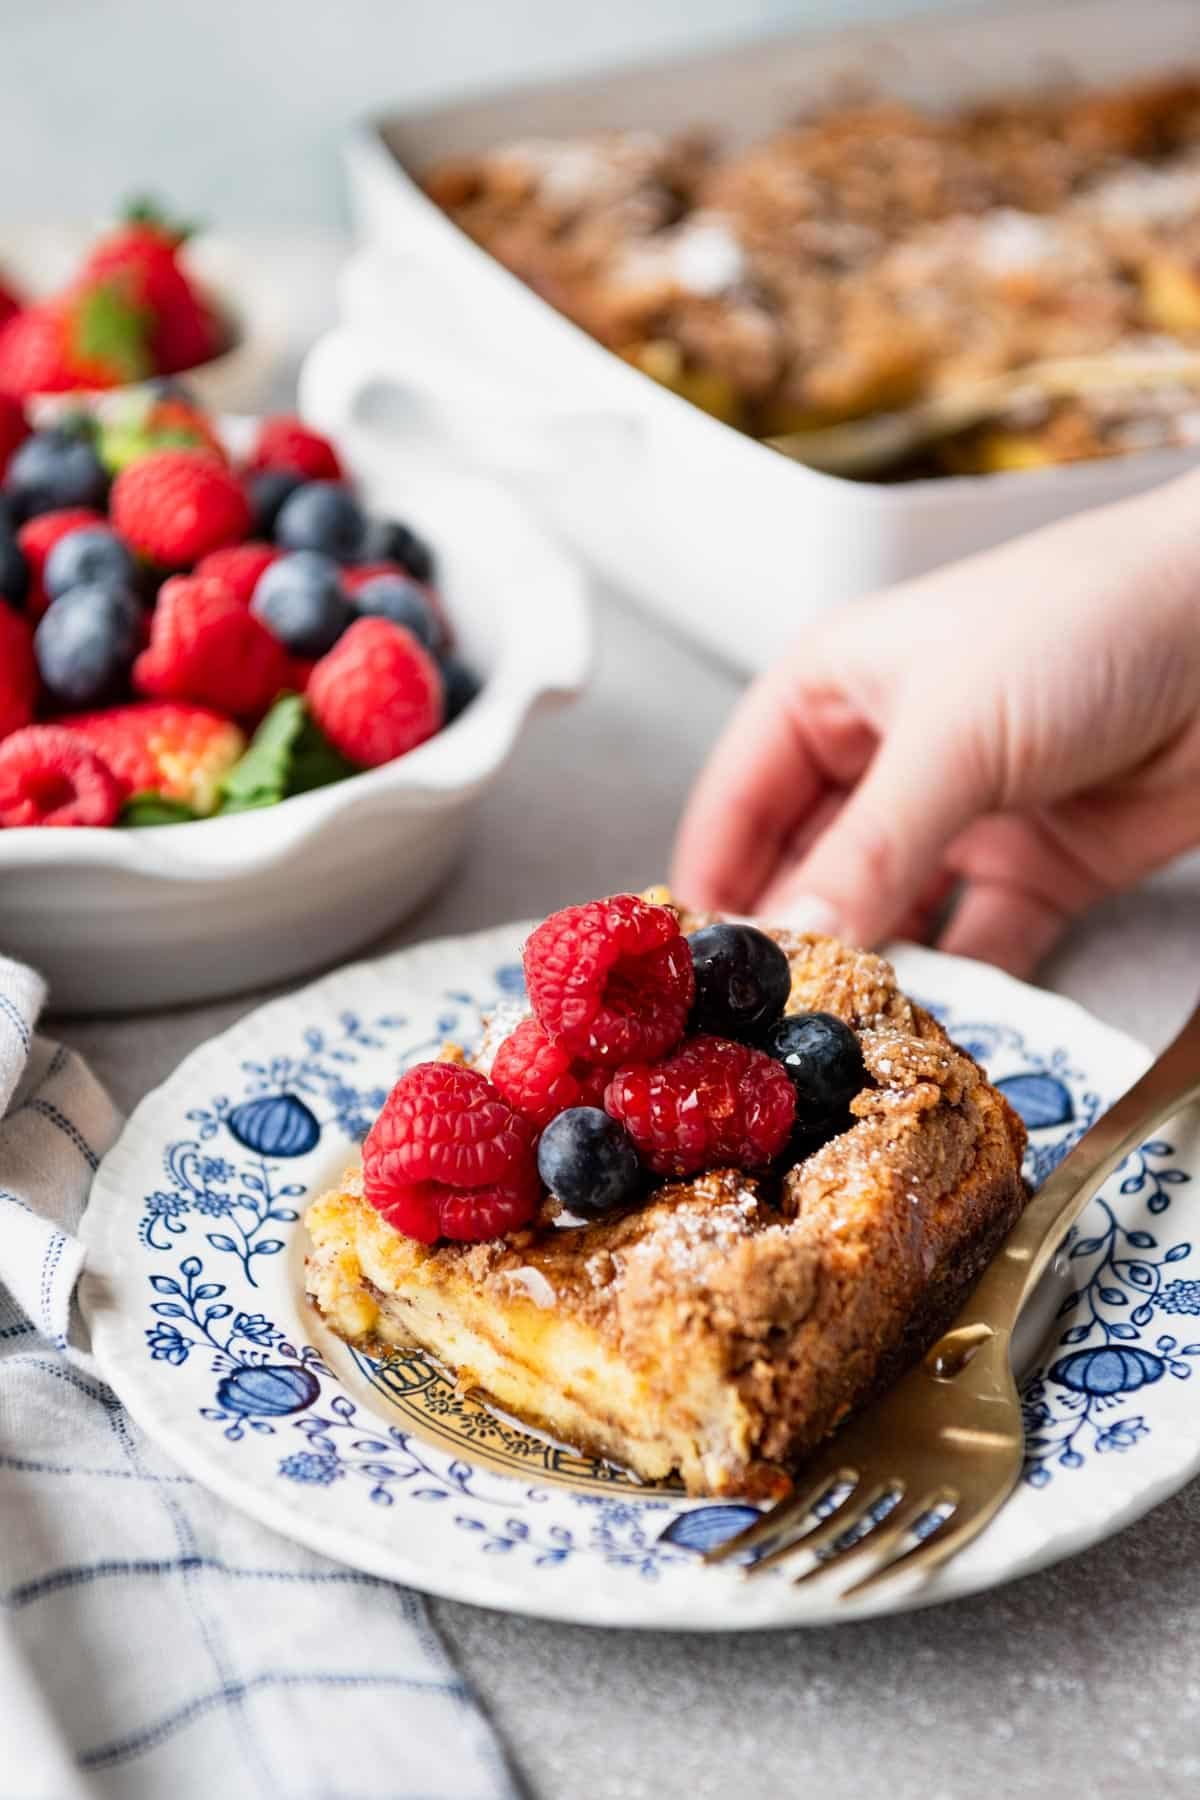 Child's hand holding a blue and white plate with brioche french toast casserole.